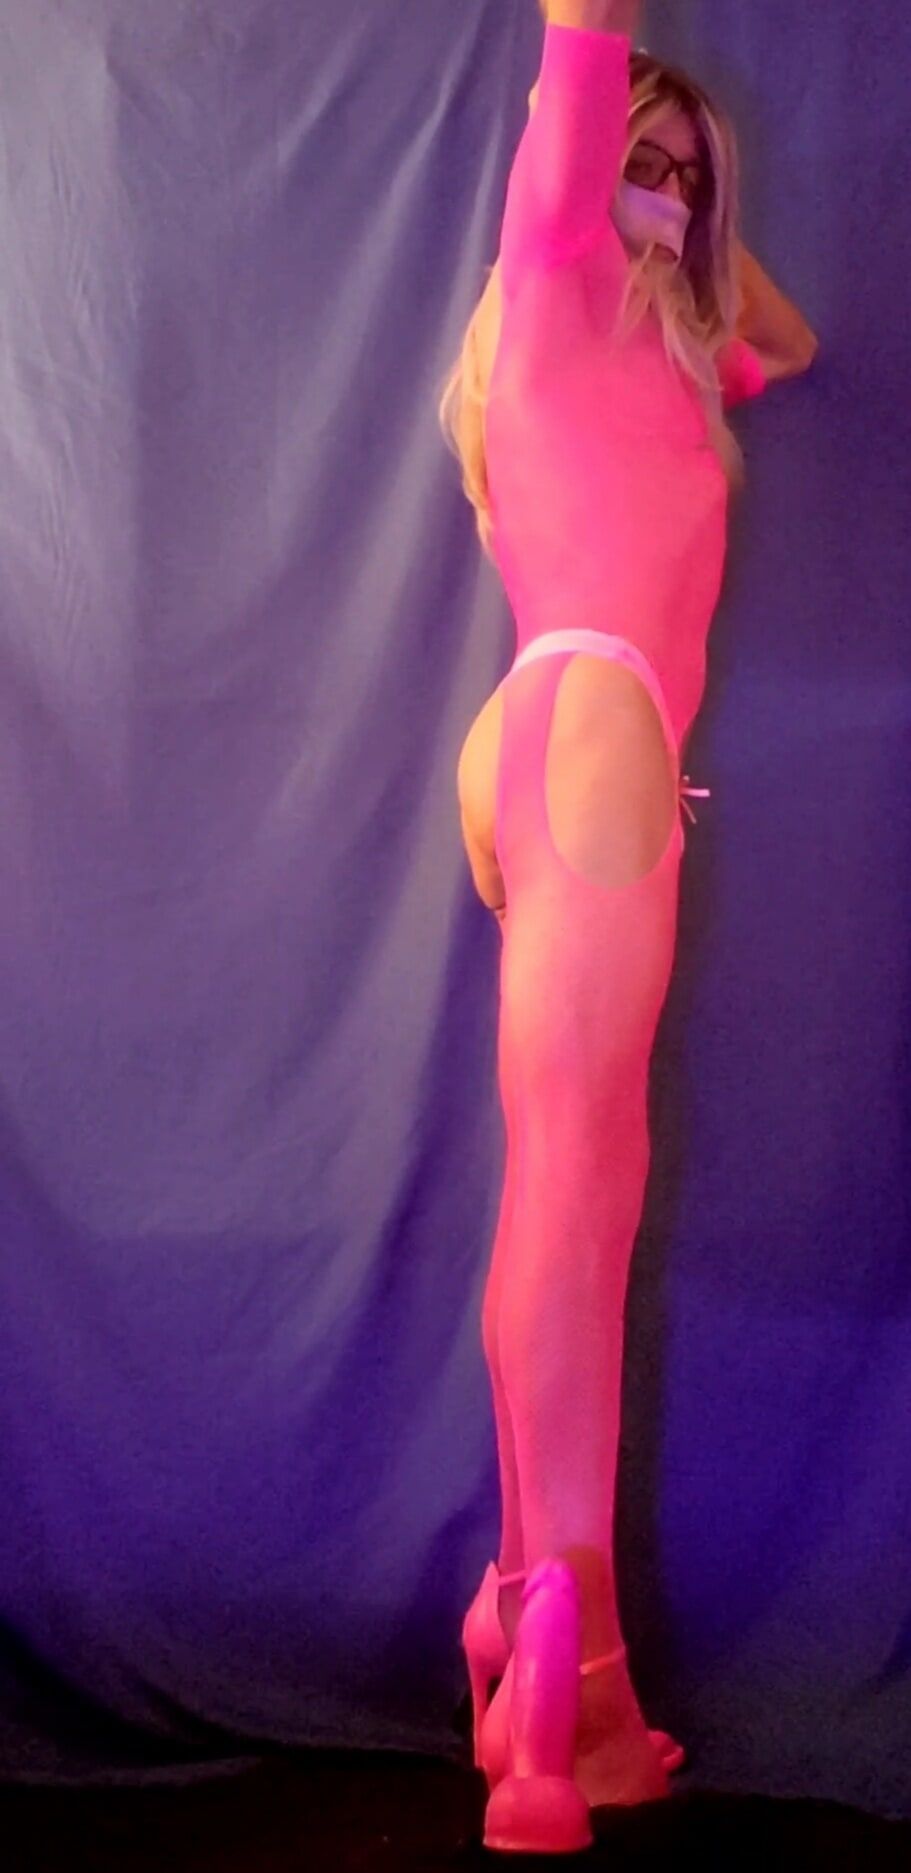 Pink bodystocking and dildo in black light